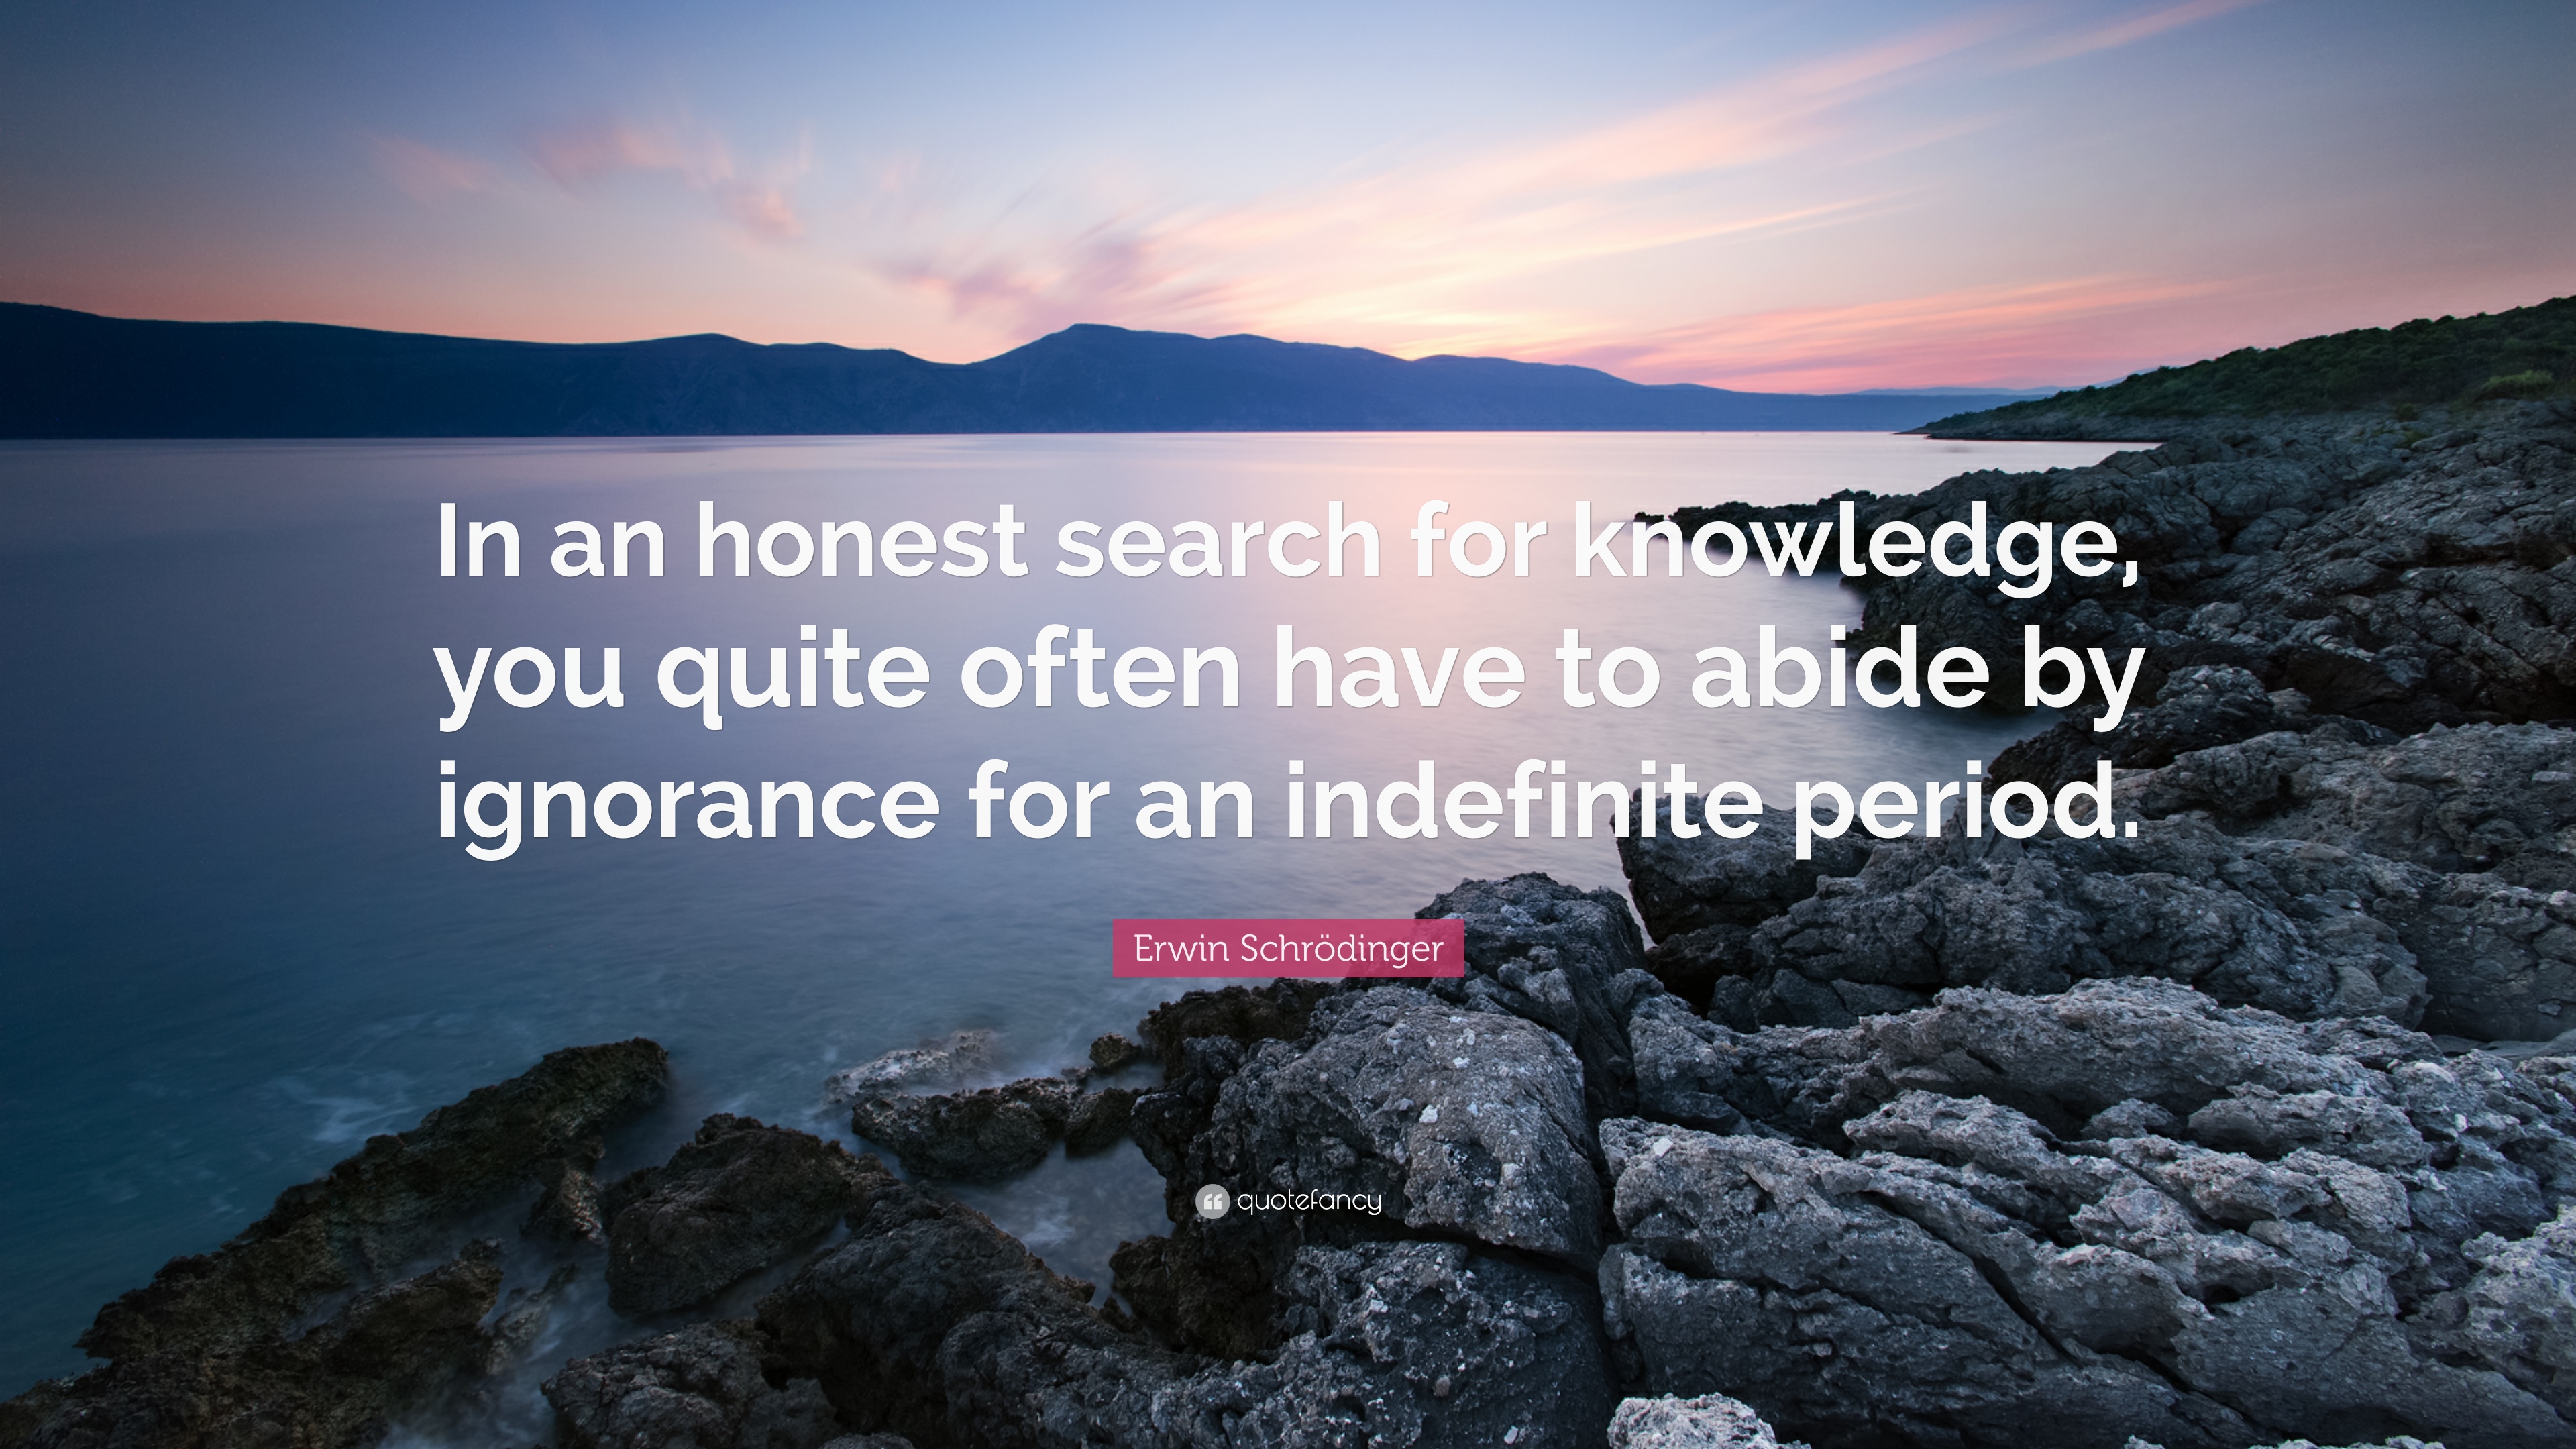 Erwin Schrödinger Quote: “In an honest search for knowledge, you quite often have to abide by